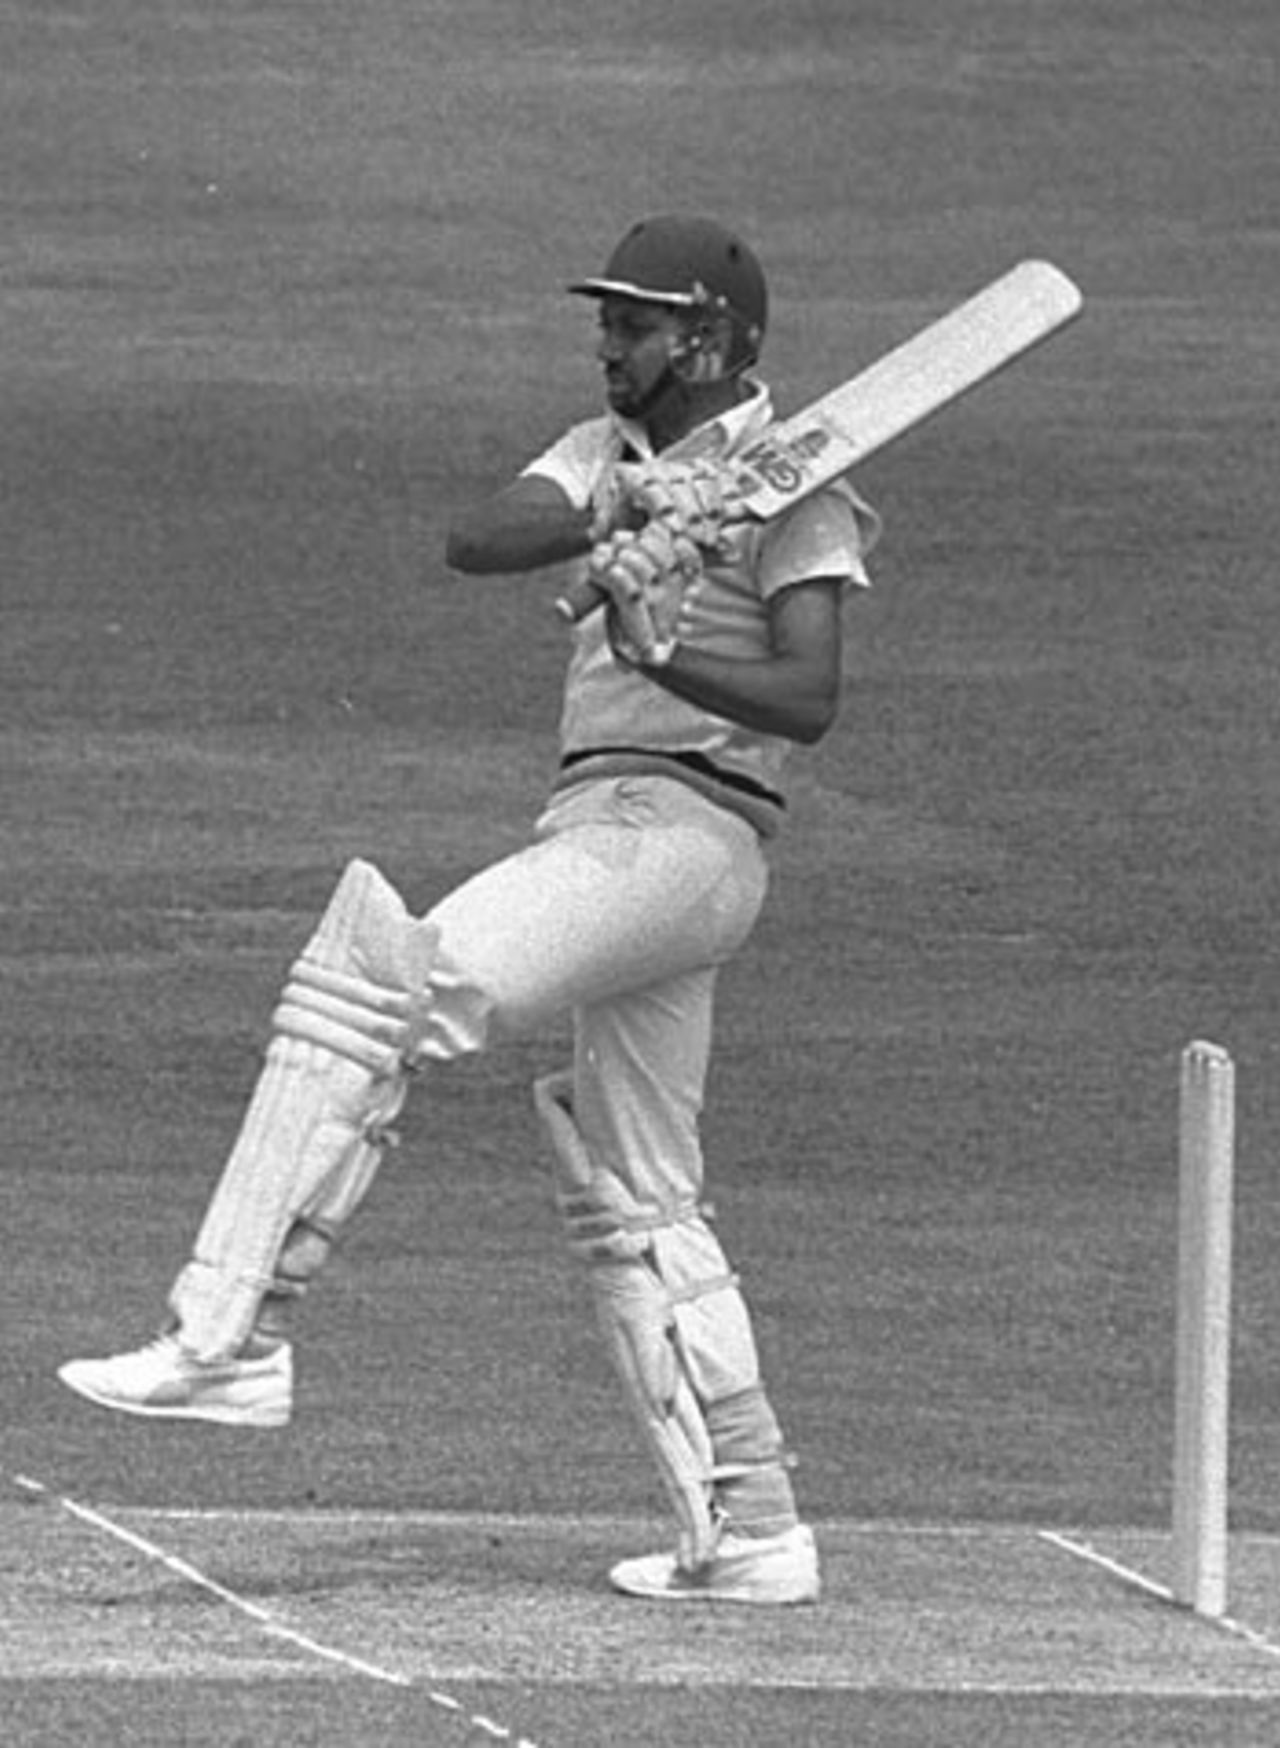 Mohinder Amarnath batting during the World Cup final, India v West Indies, Lord's, June 25, 1983